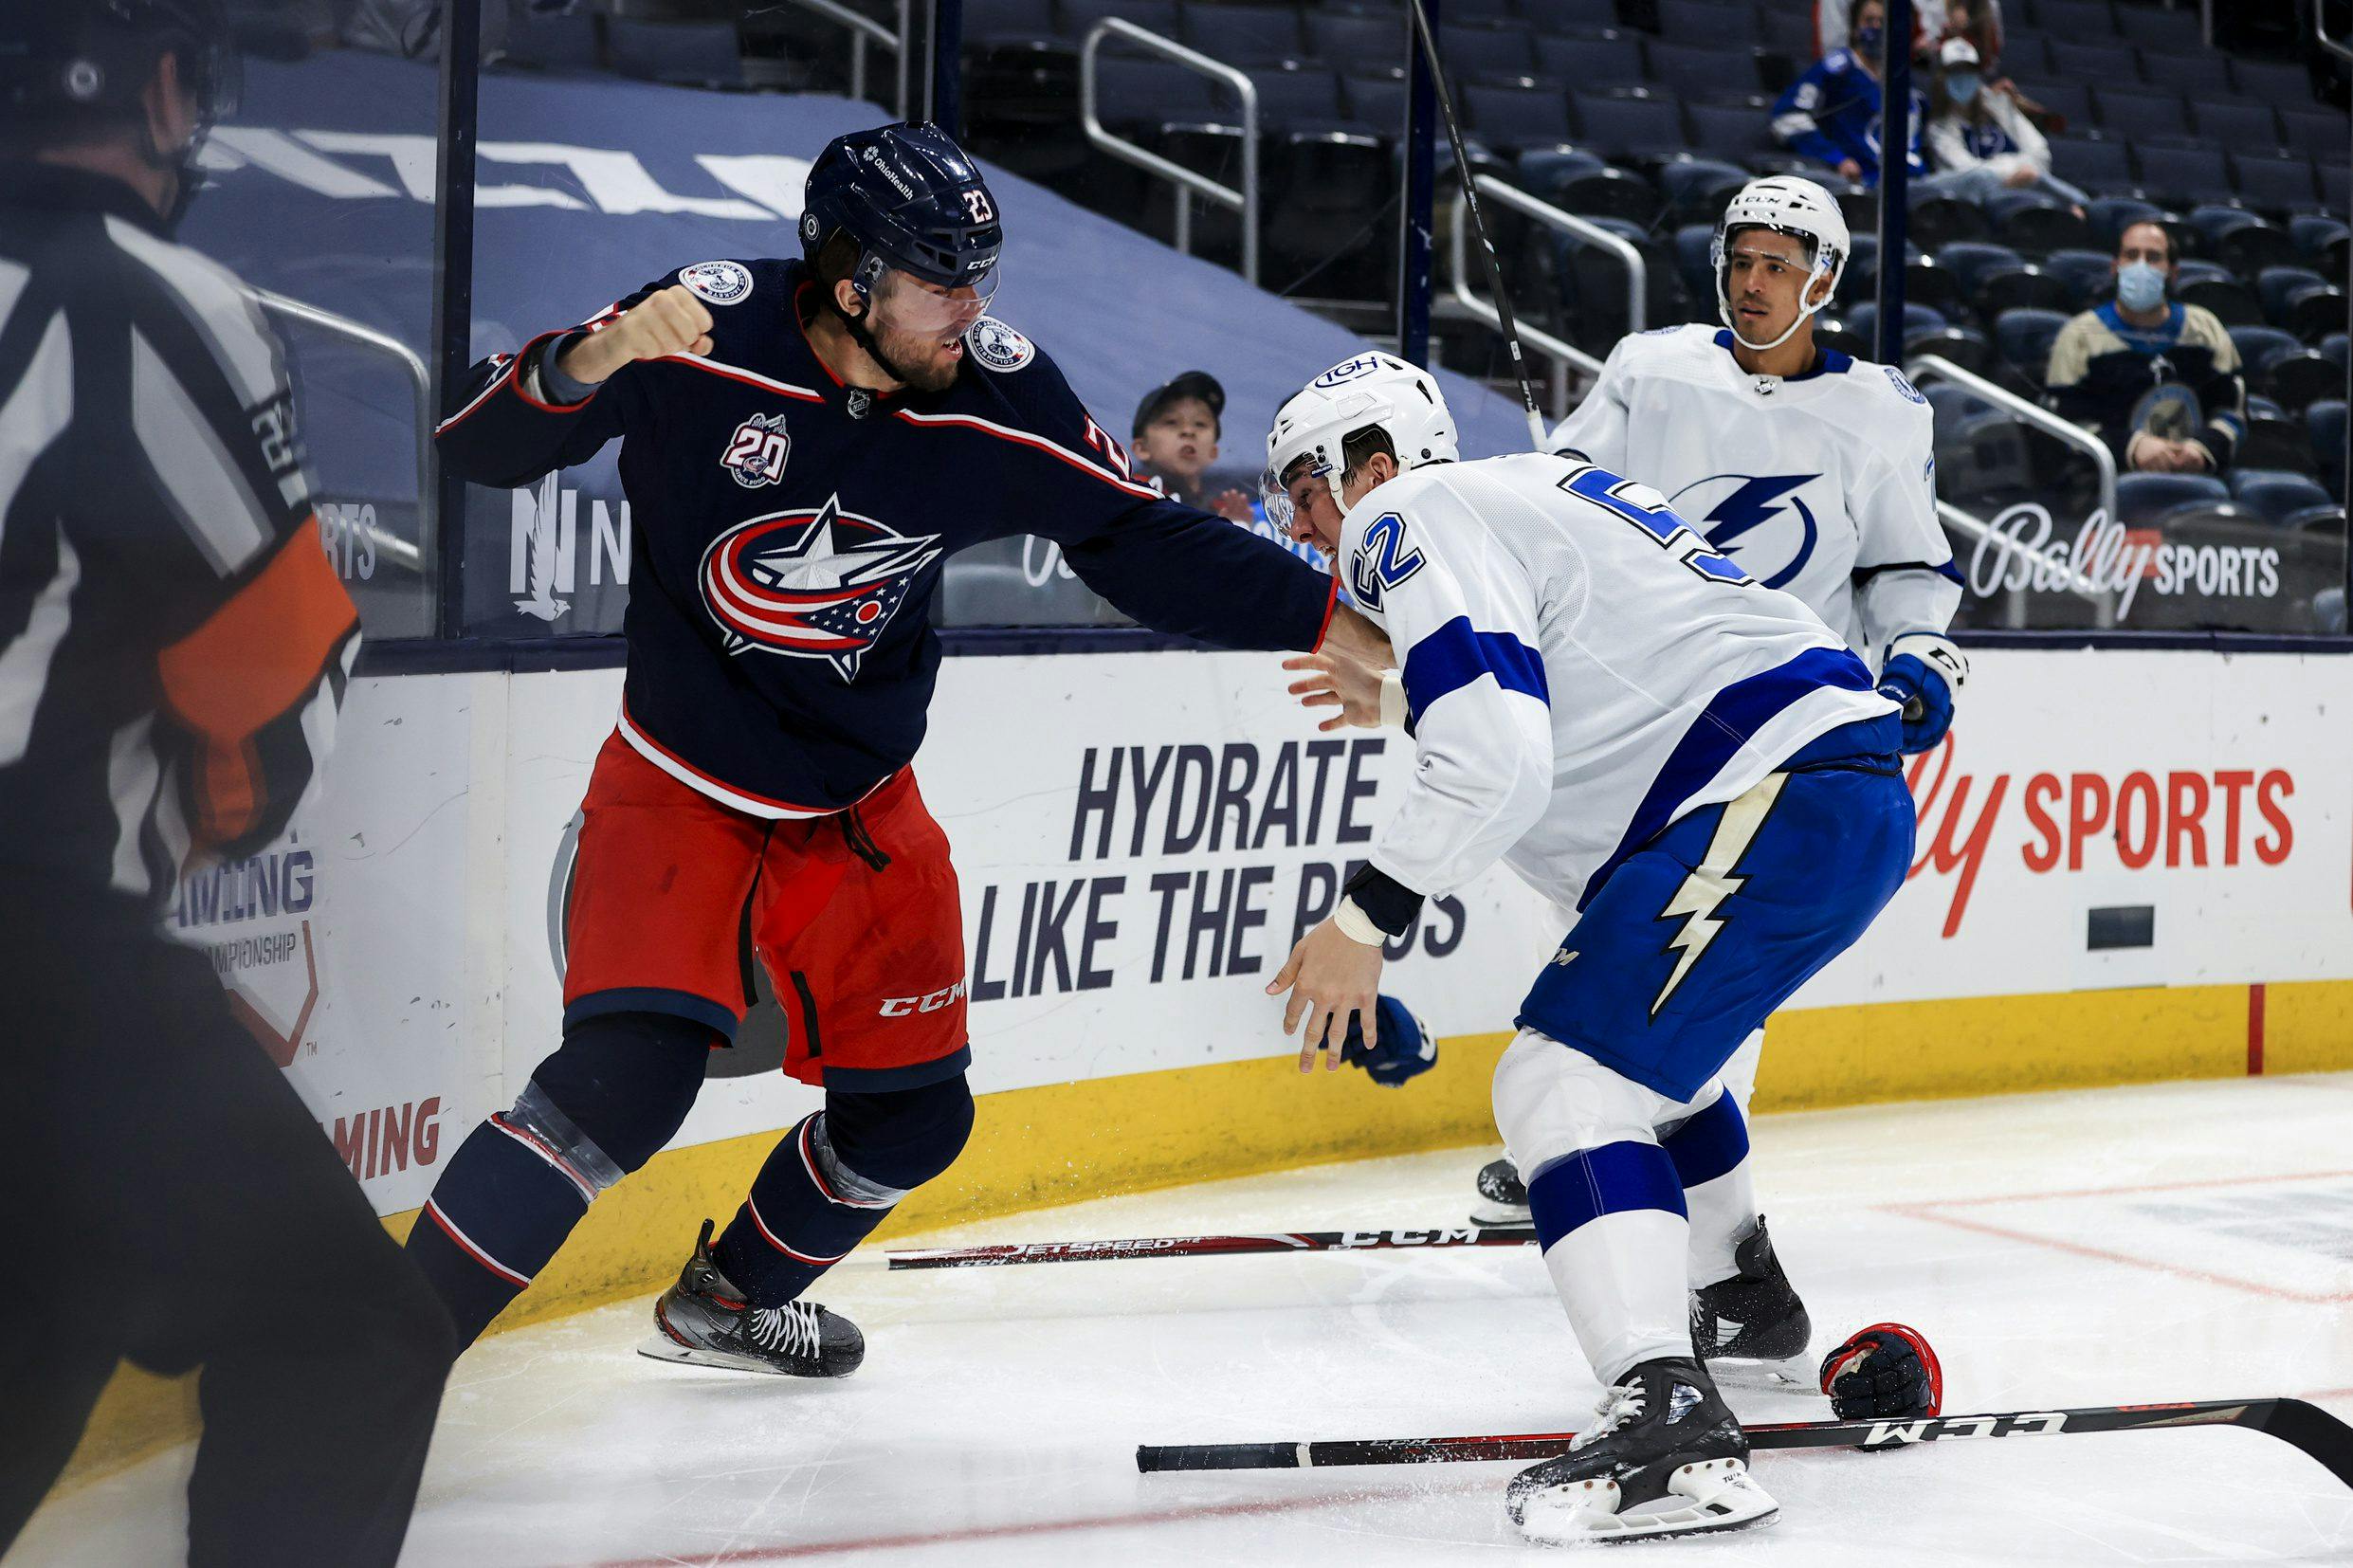 Stefan Matteau returns to Columbus Blue Jackets on professional tryout agreement